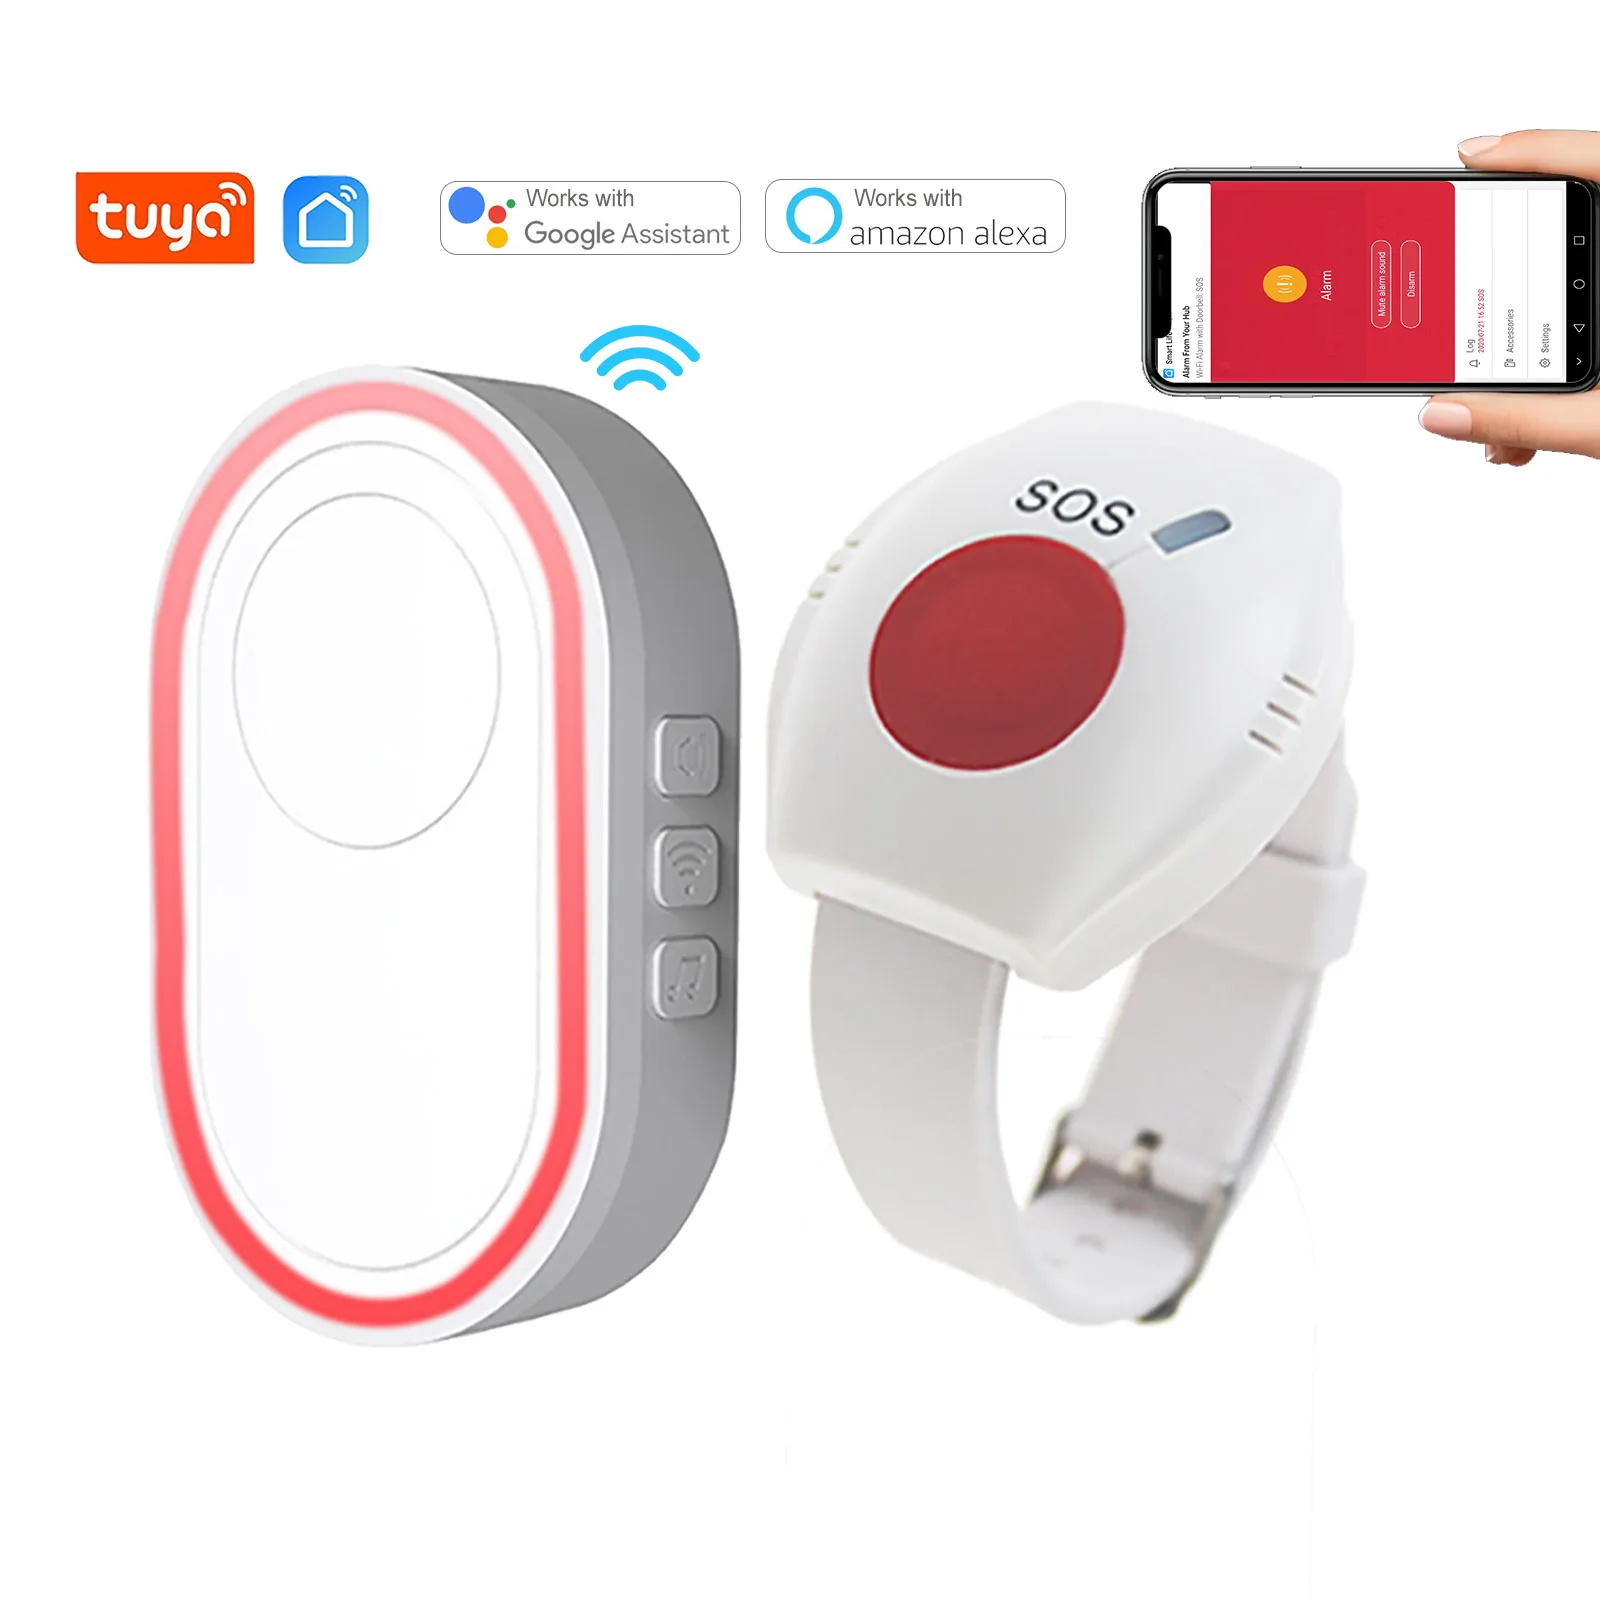 New WIFI Panic Button for Elderly Alarm RF 433mhz SOS Bracelet Emergency Wireless Watch Call Old People Android IOS APP